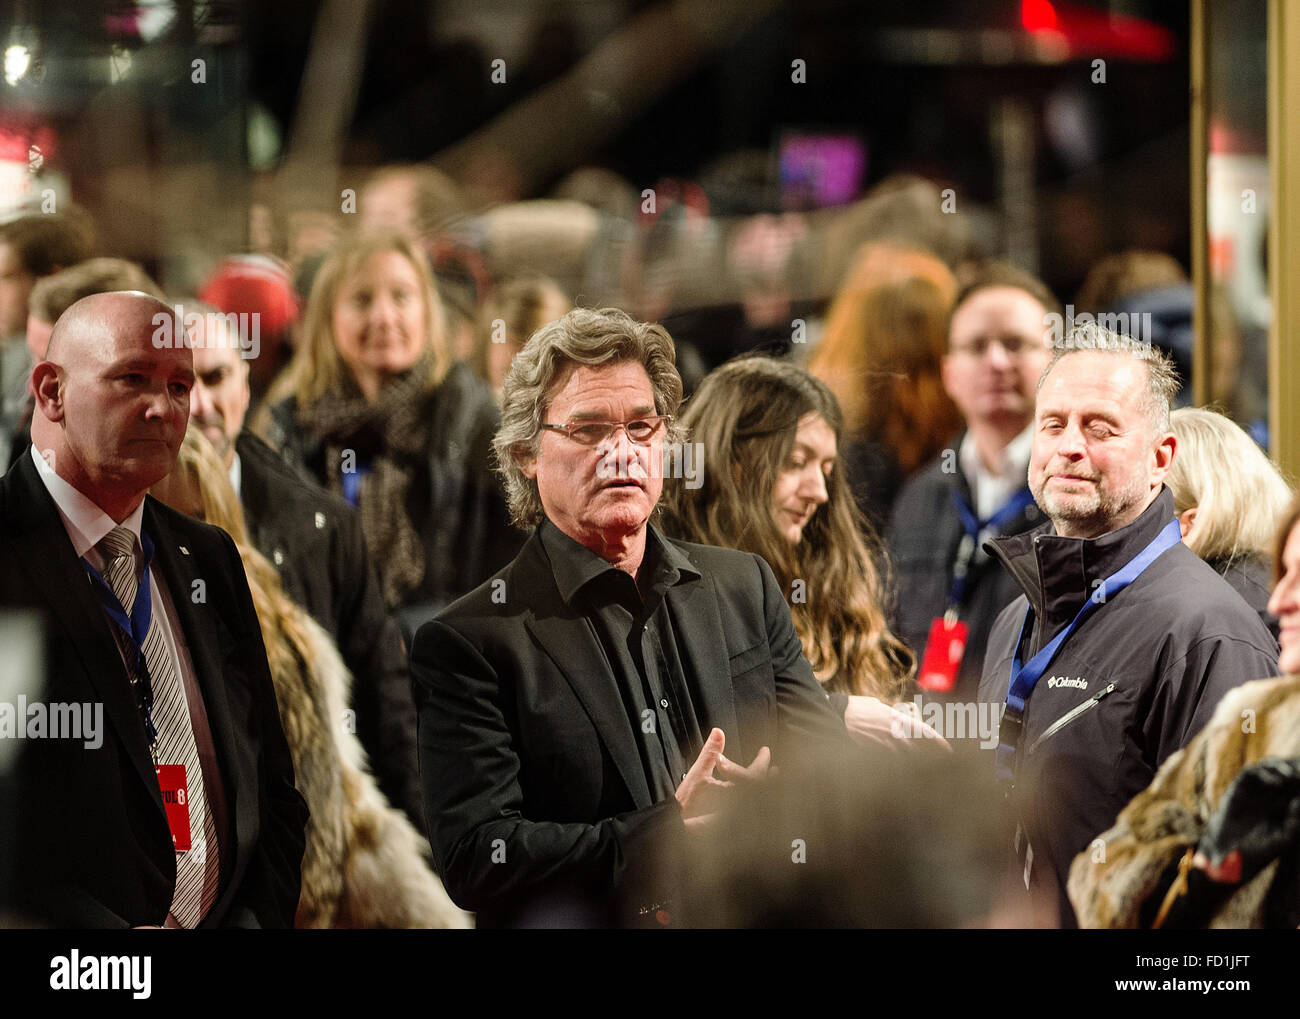 Berlin, Germany. 26th Jan, 2016. US actor Kurt Russell arrives for the German premiere of the film 'The Hateful 8' at the Zoo Palast cinema in Berlin, Germany, 26 January 2016. Photo: Paul Zinken/dpa/Alamy Live News Stock Photo